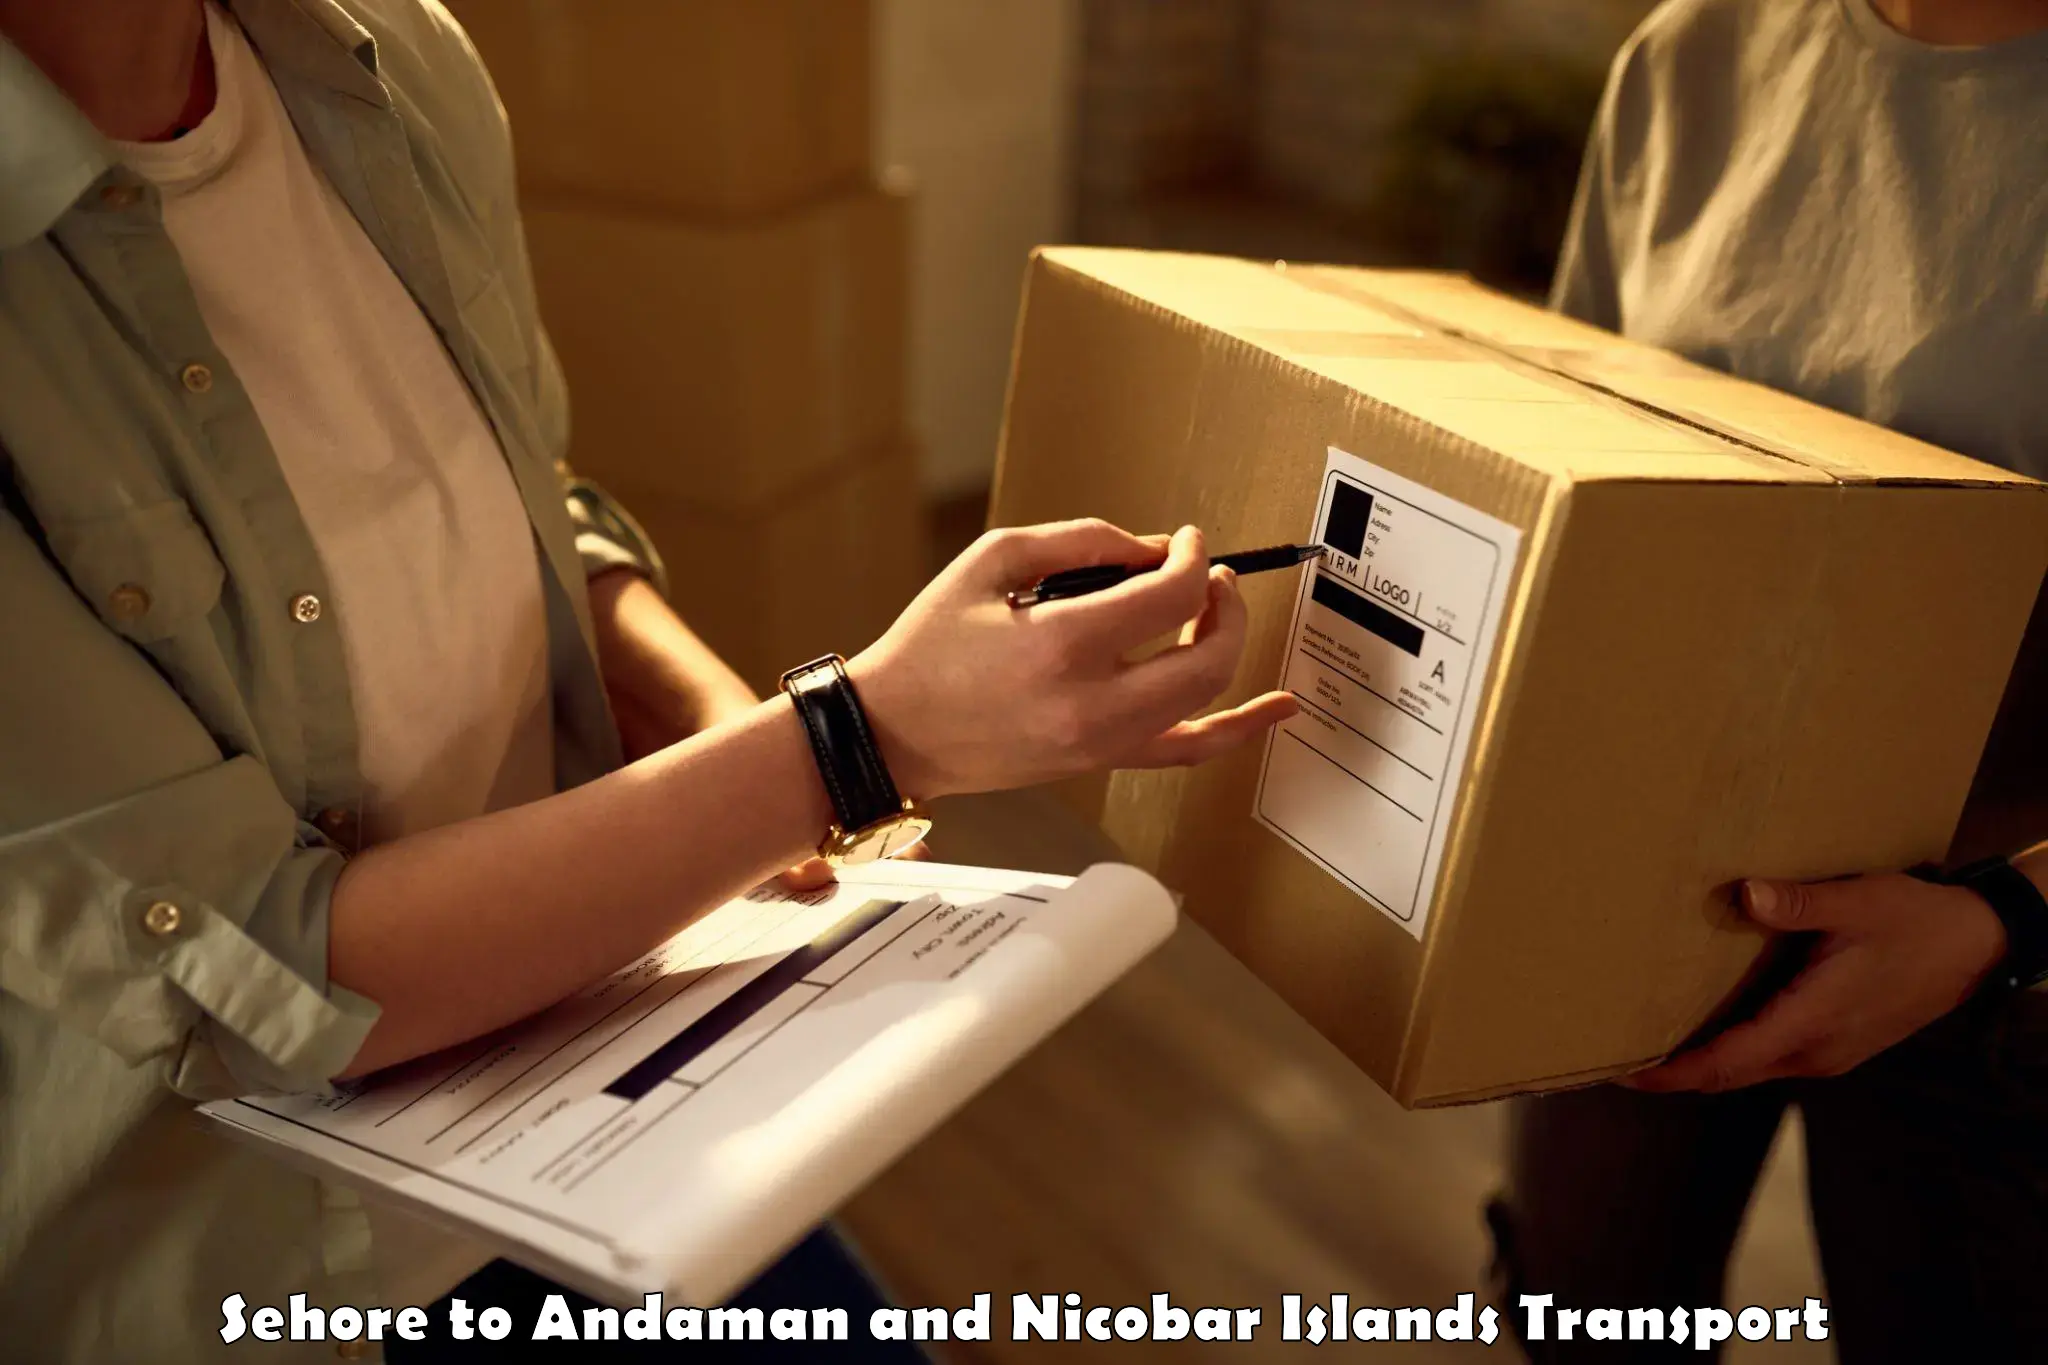 Shipping services in Sehore to Andaman and Nicobar Islands